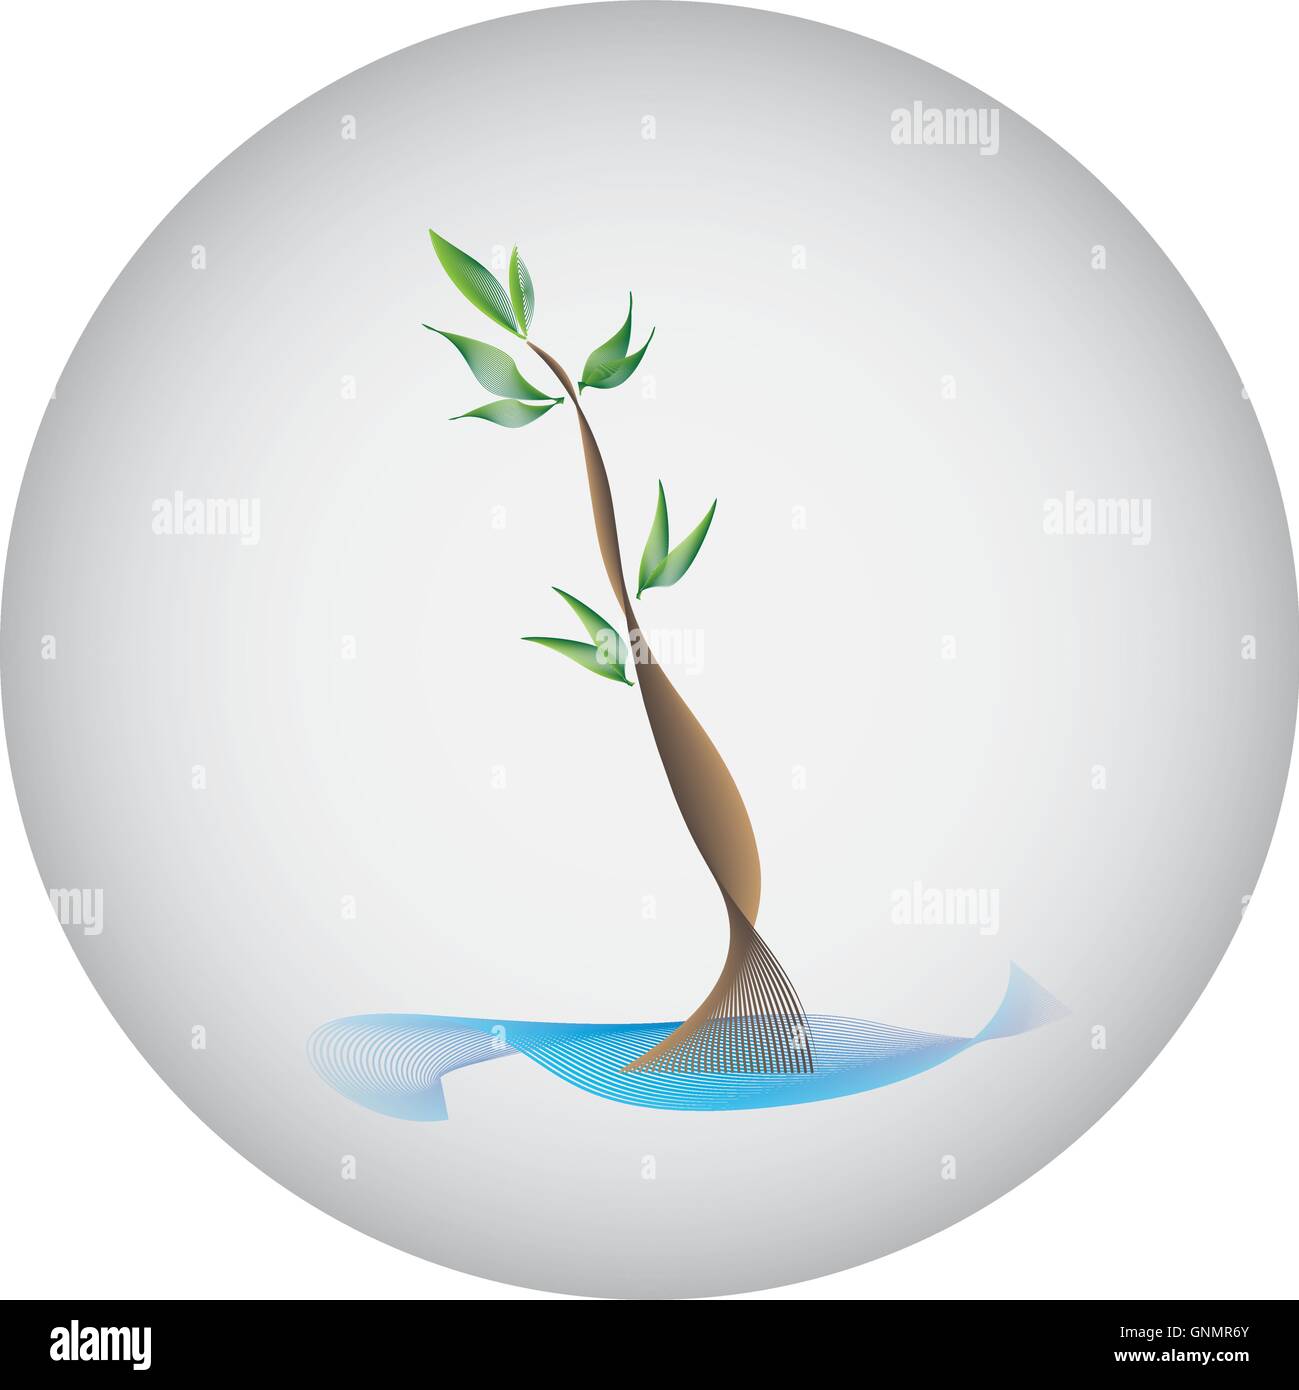 Isolated sticker with an abstract tree composed by stripes Stock Vector